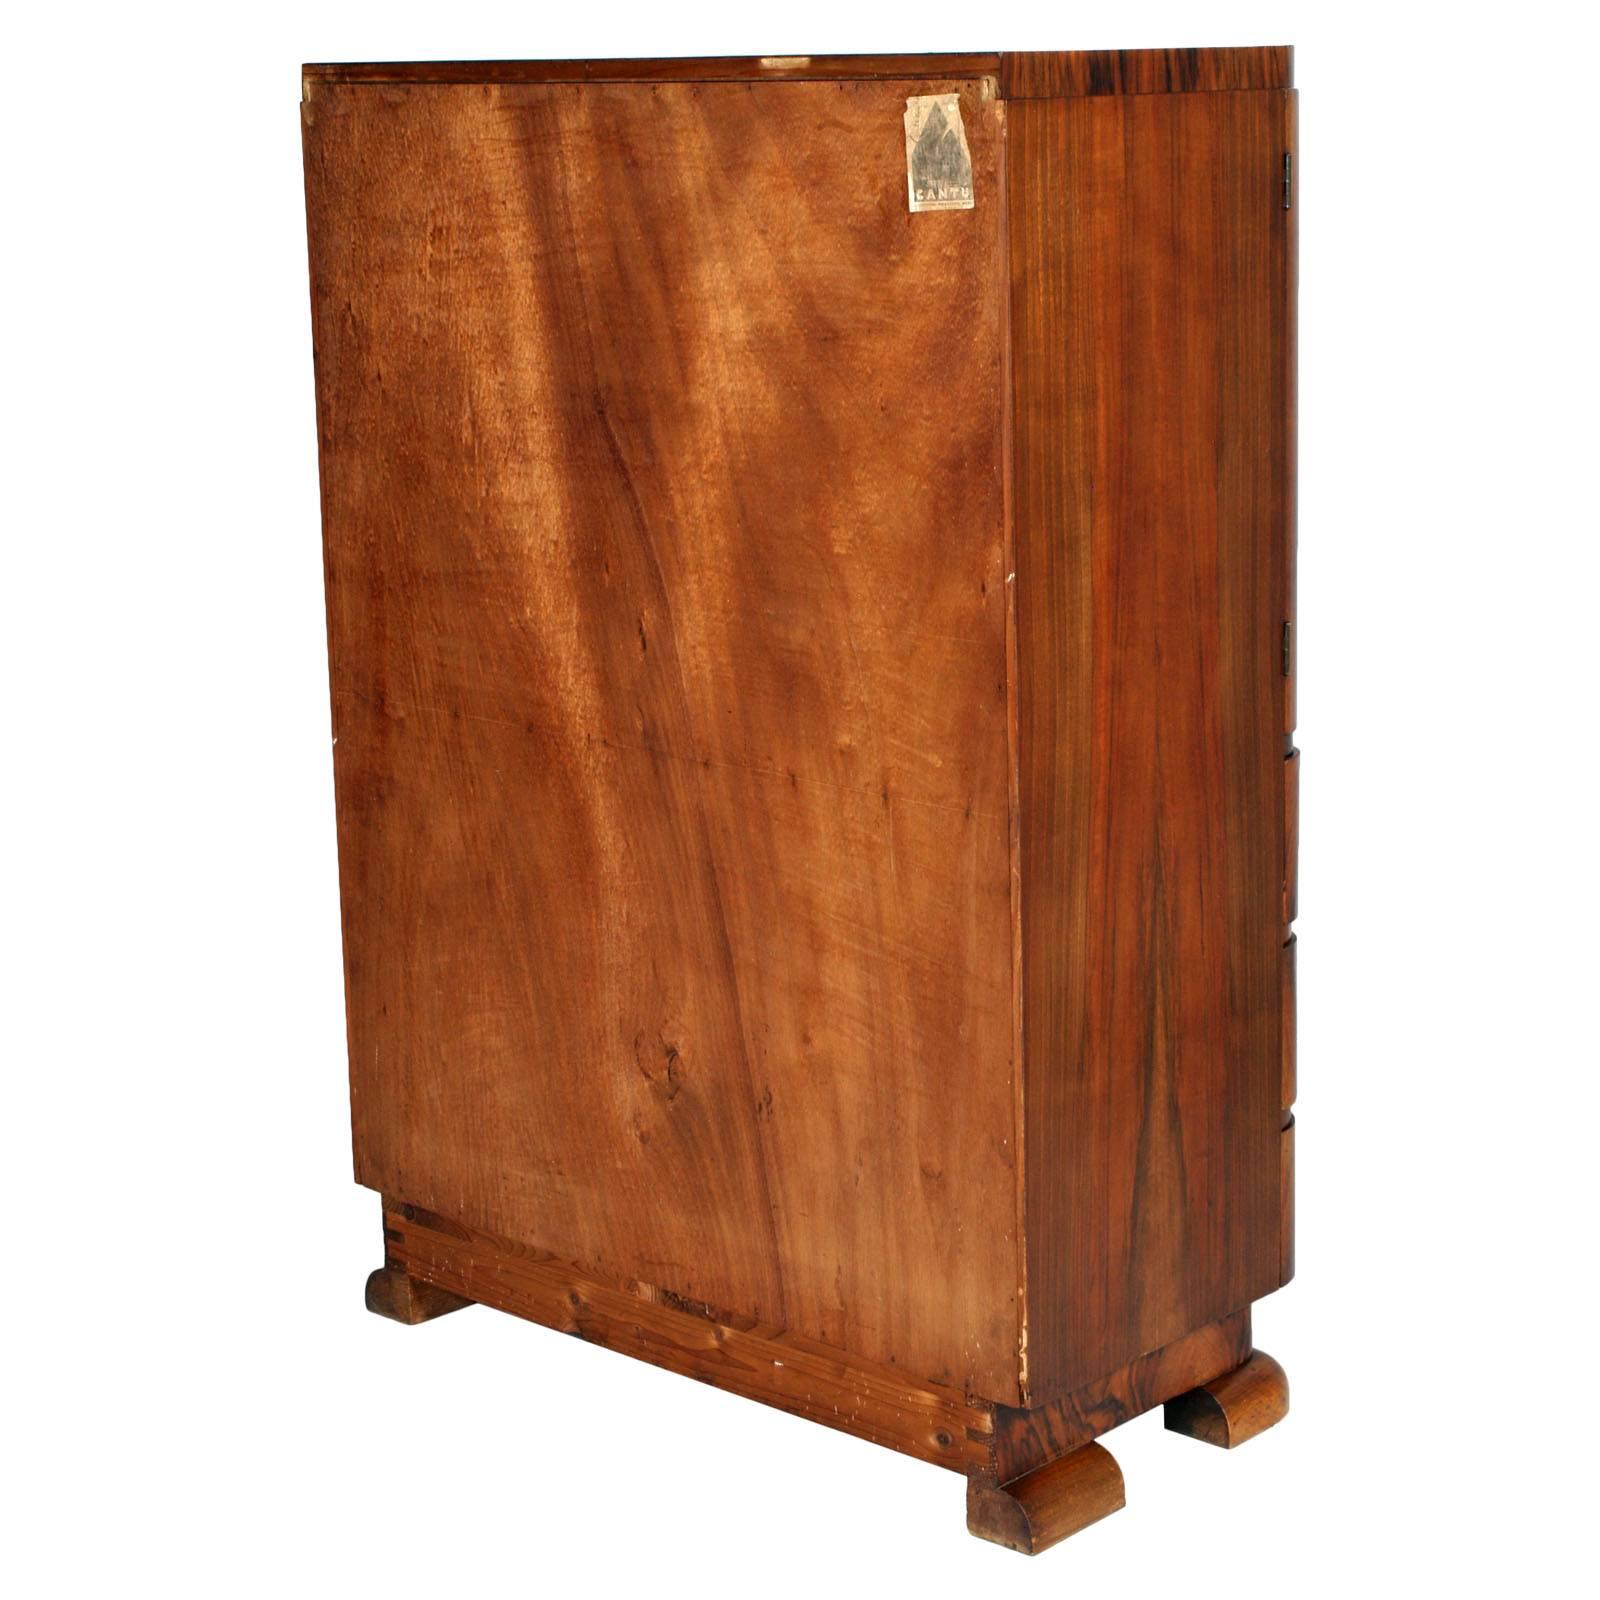 Mid-20th Century 1930s Art Deco Cabinet Dresser in Burl Walnut by Crafts Cantu For Sale